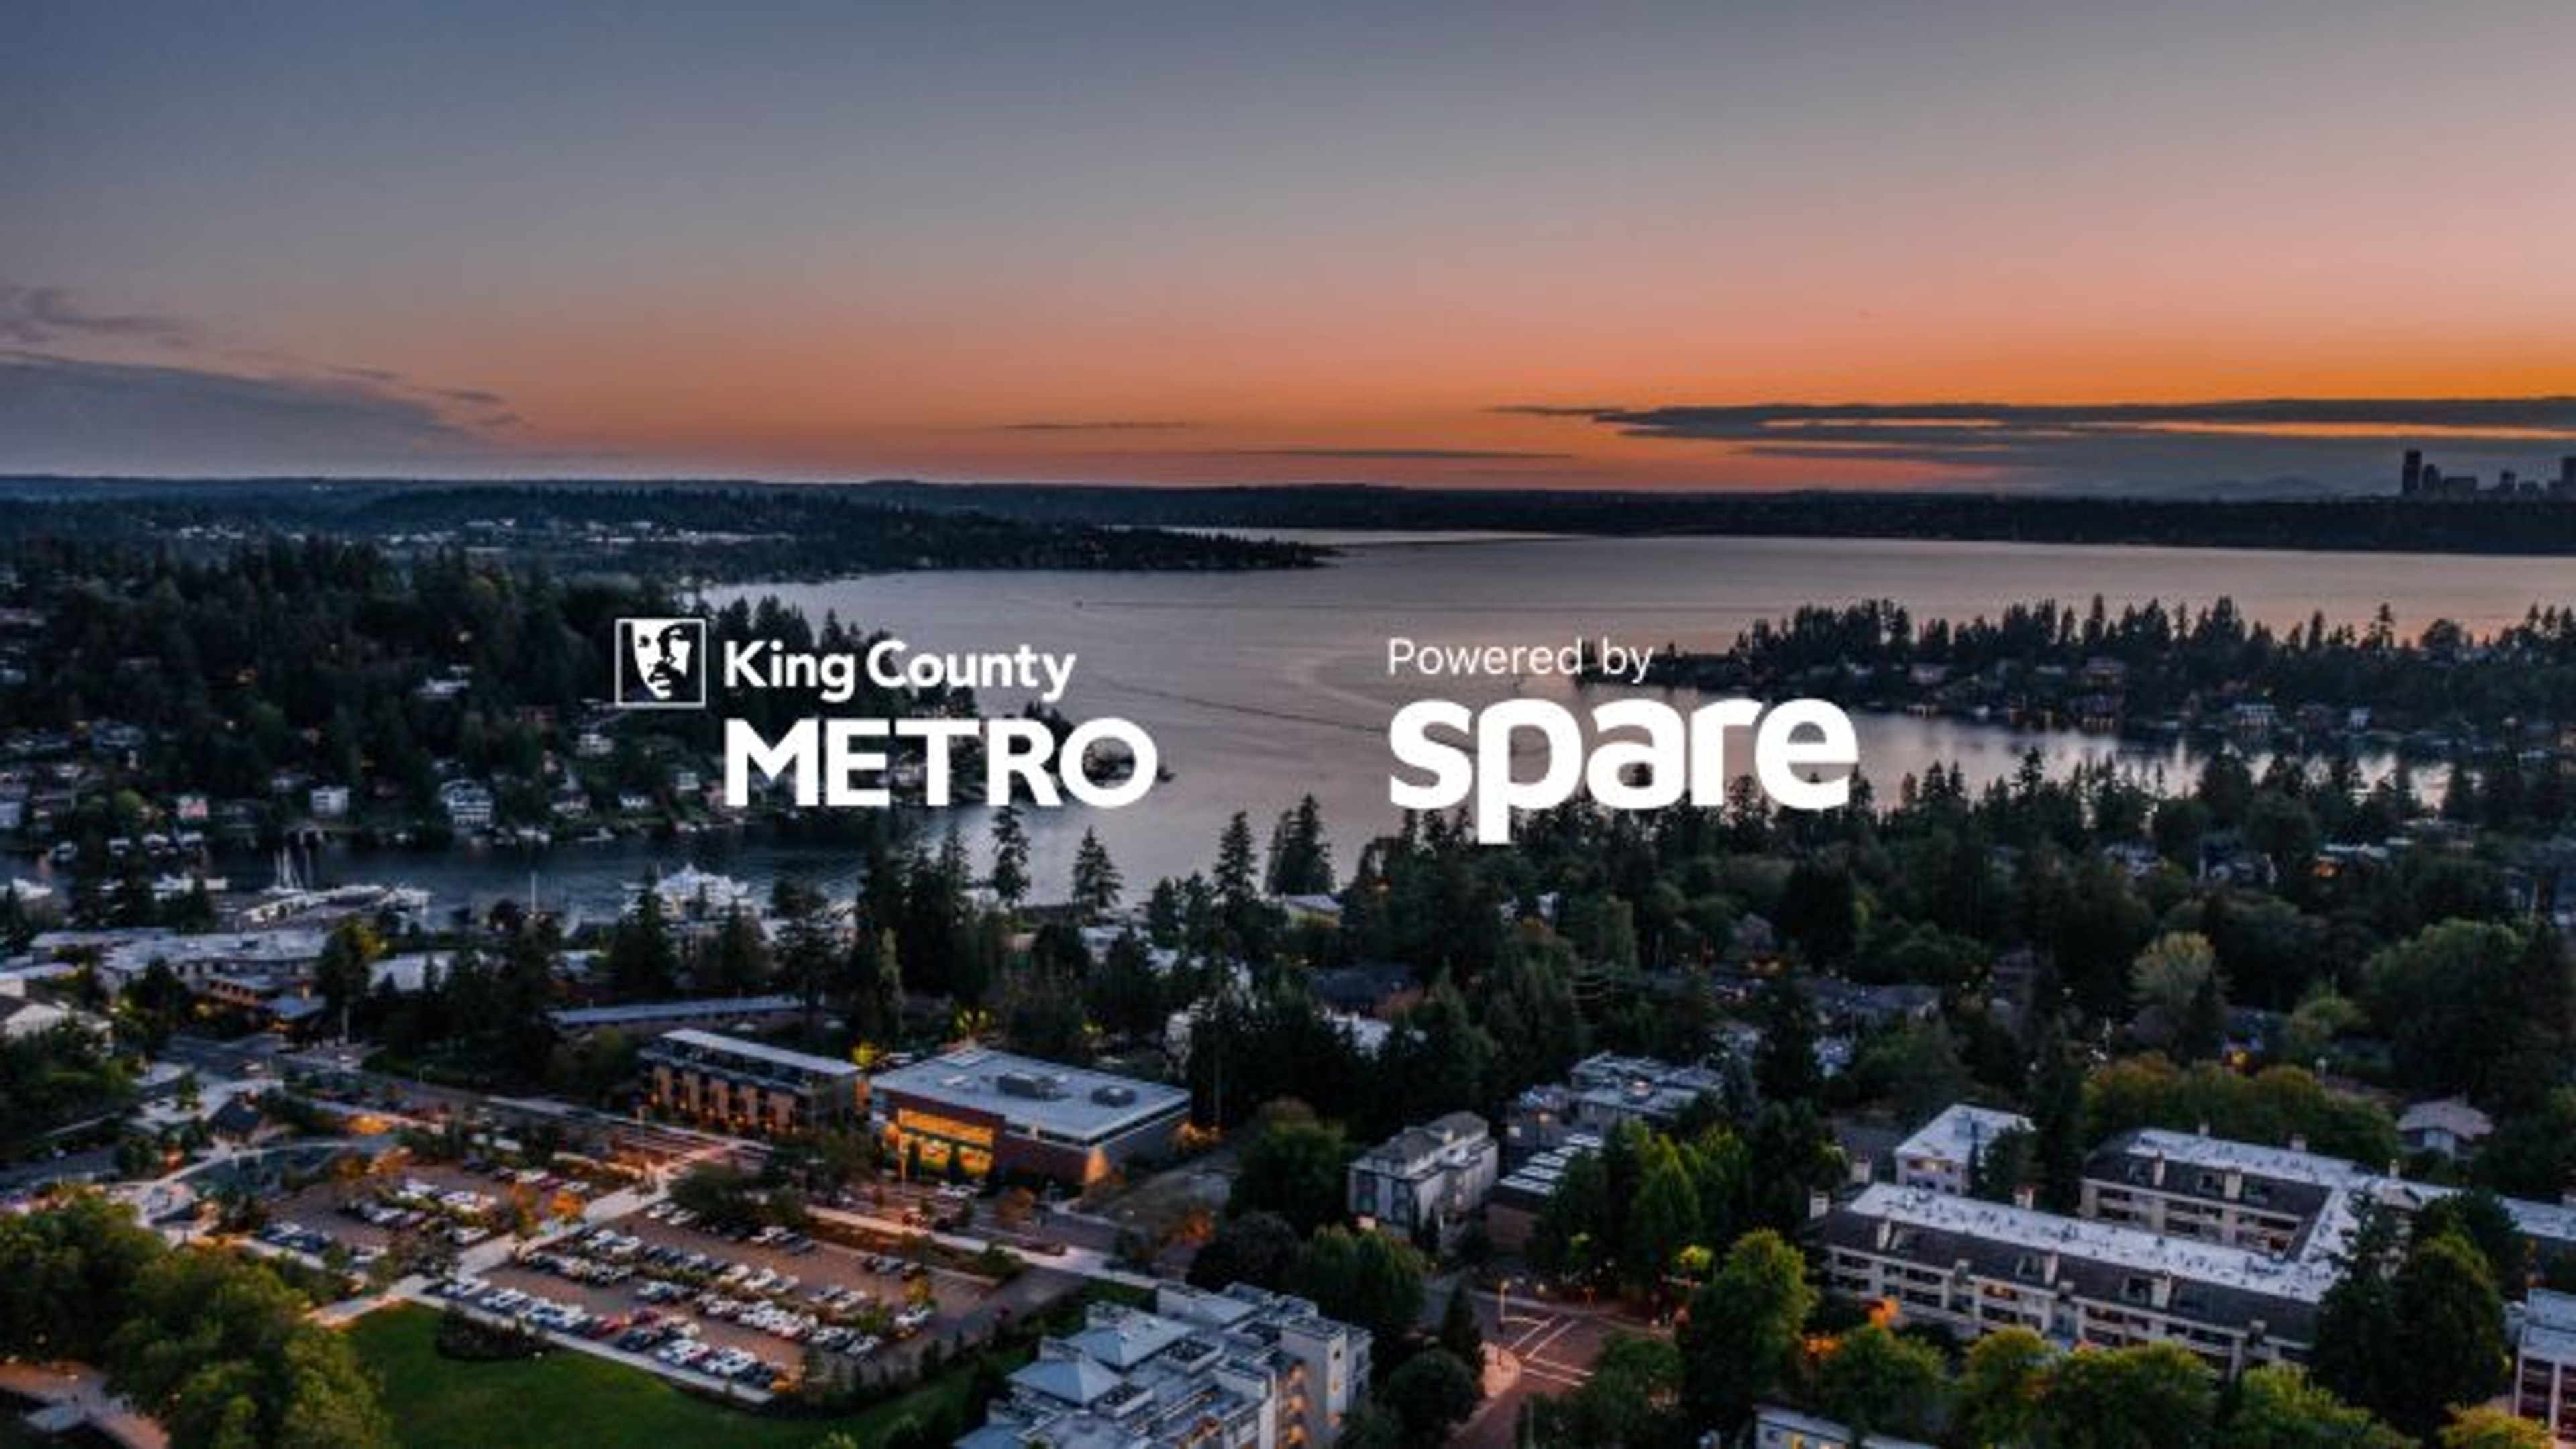 King County Metro and Spare